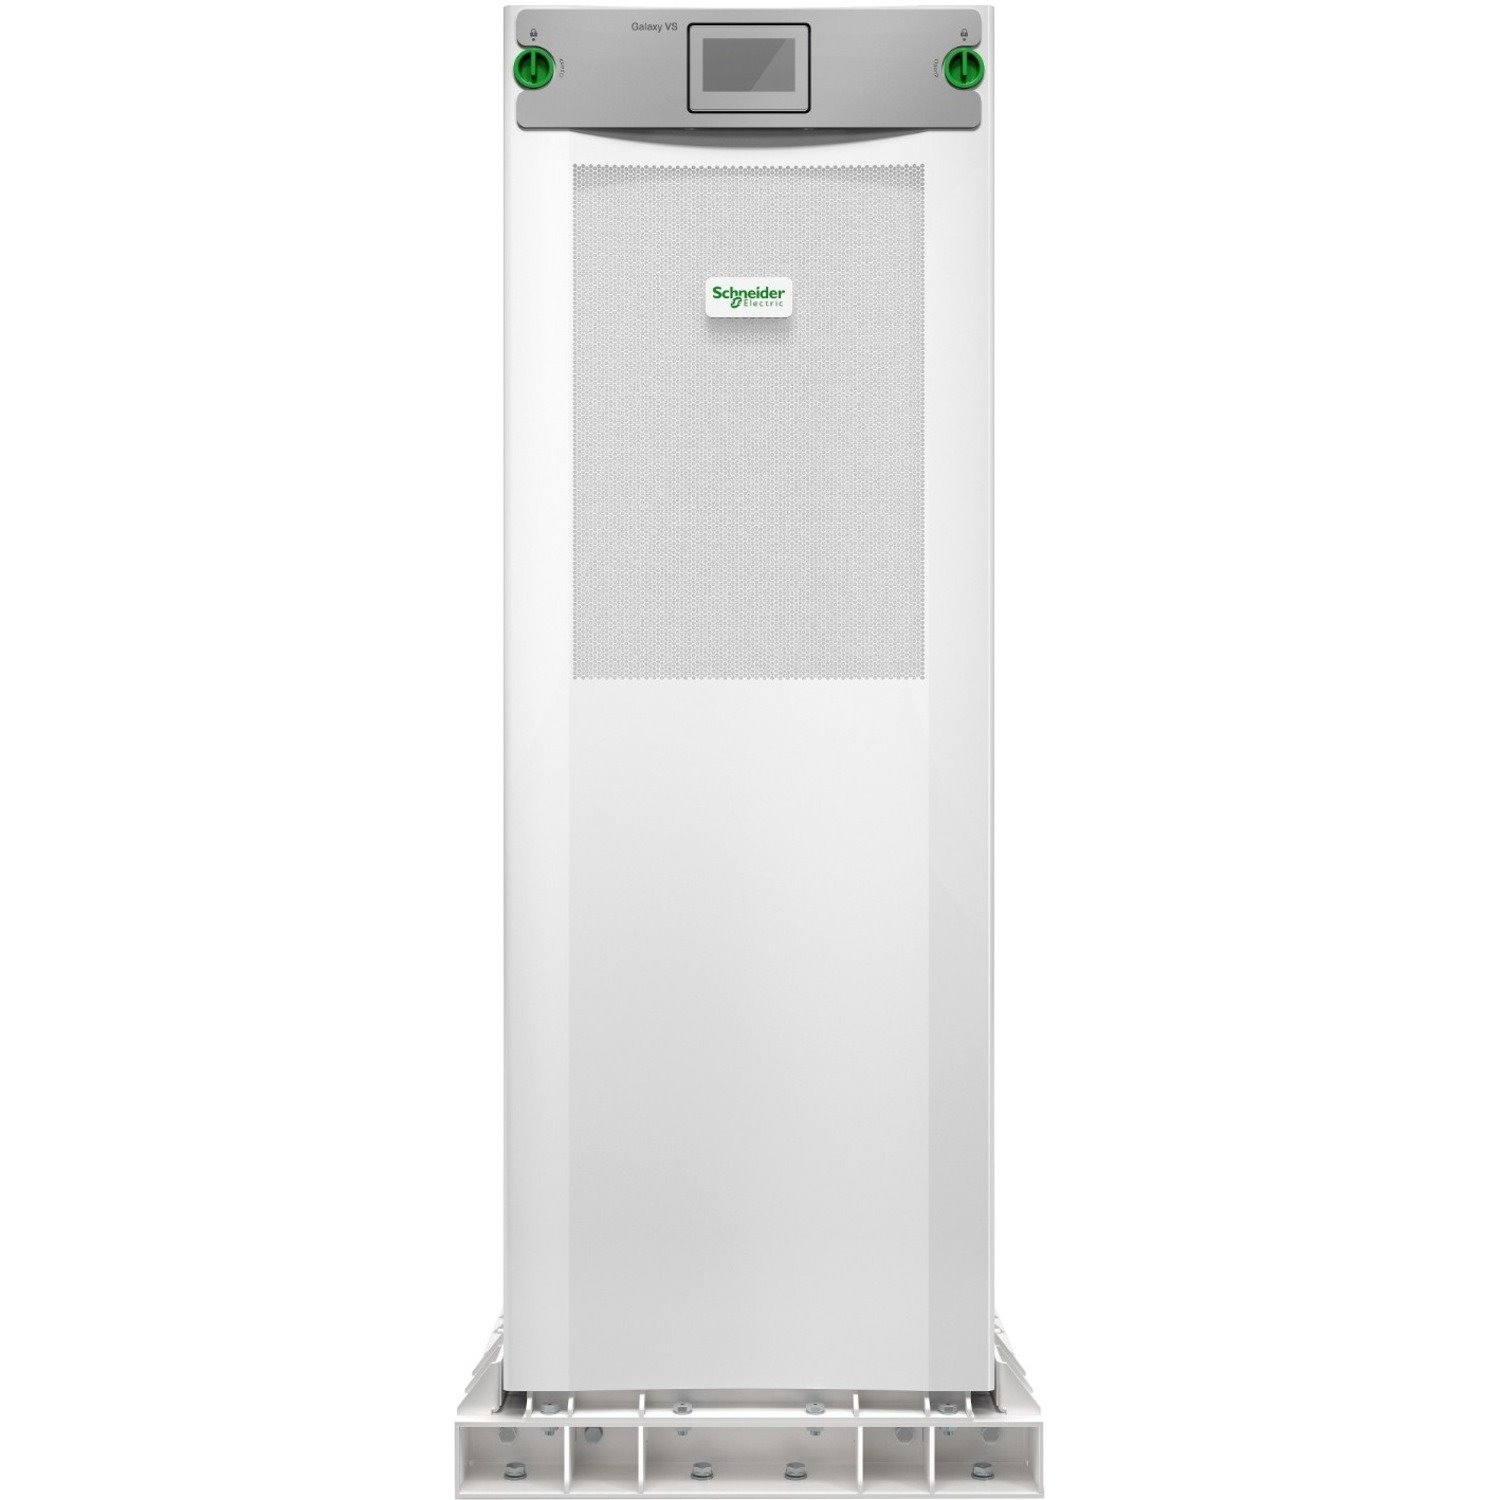 Schneider Electric Galaxy VS Double Conversion Online UPS - 120 kVA/120 kW - Three Phase